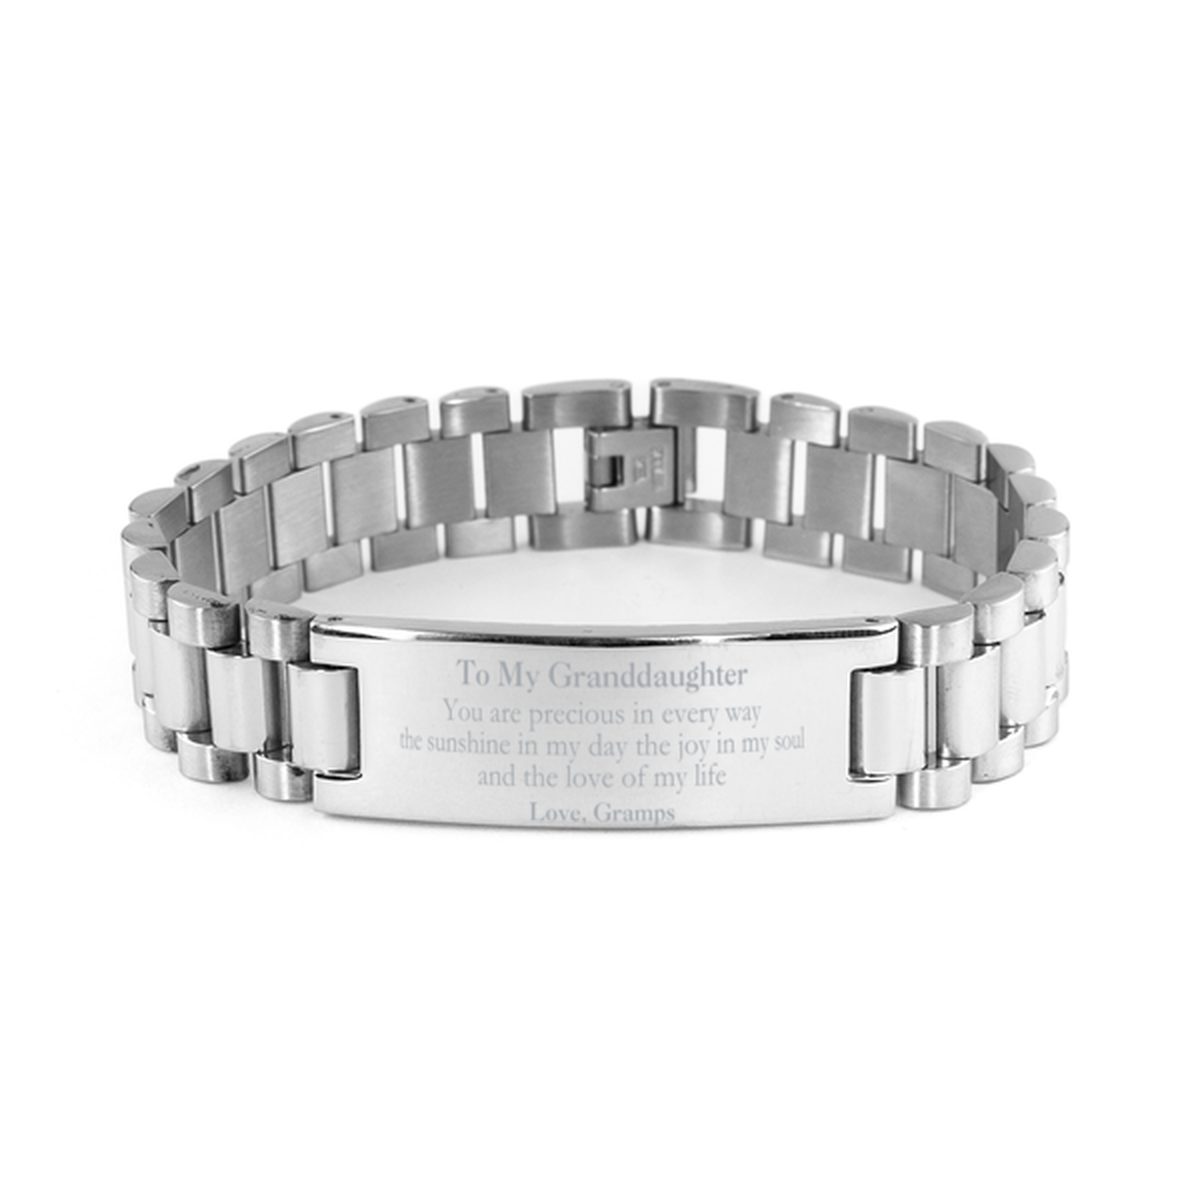 Graduation Gifts for Granddaughter Ladder Stainless Steel Bracelet Present from Gramps, Christmas Granddaughter Birthday Gifts Granddaughter You are precious in every way the sunshine in my day. Love, Gramps